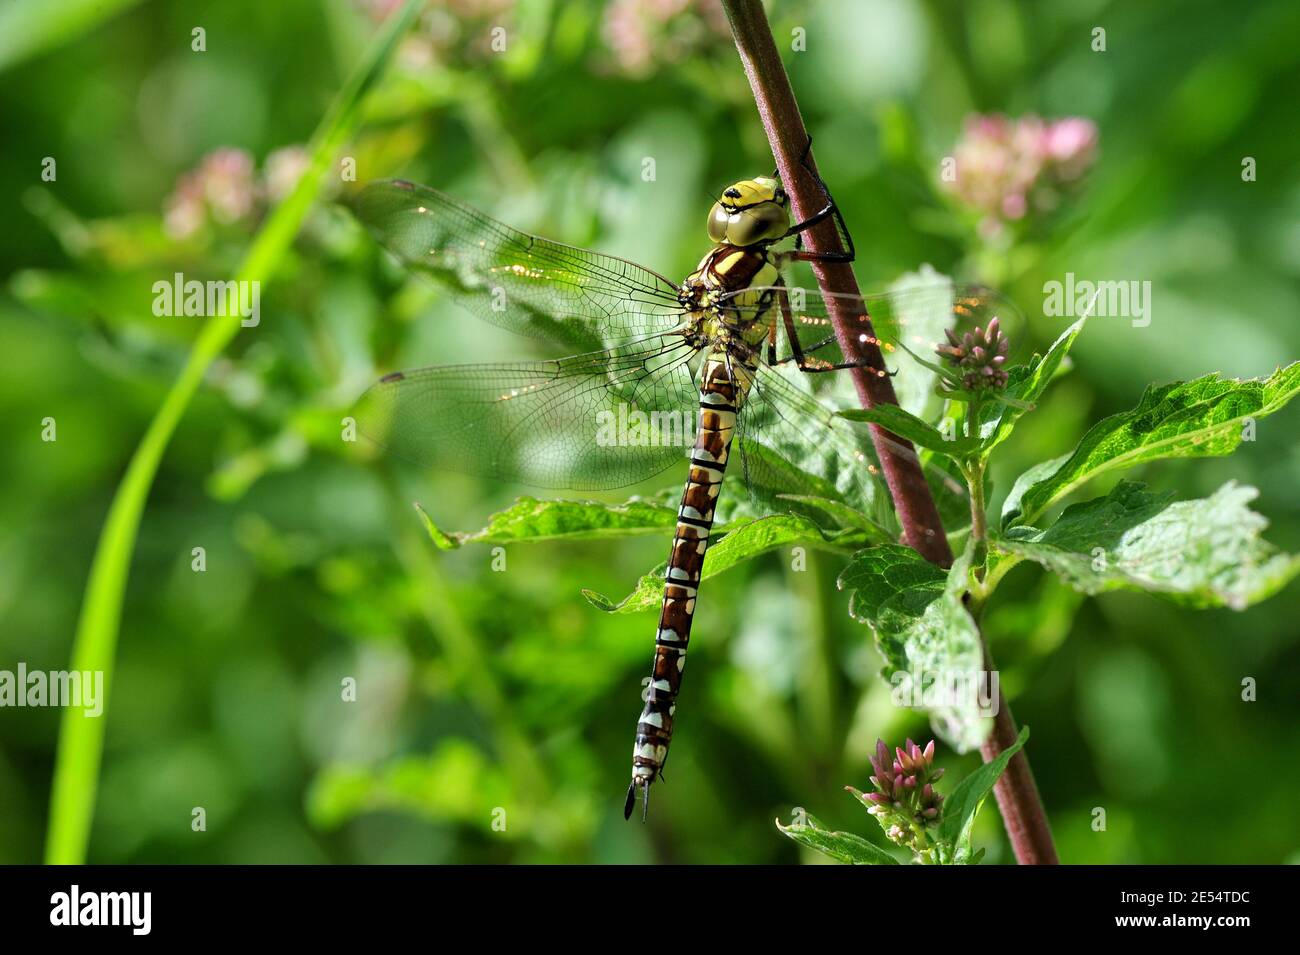 Hawker dragonfly clinging to Plant Stock Photo